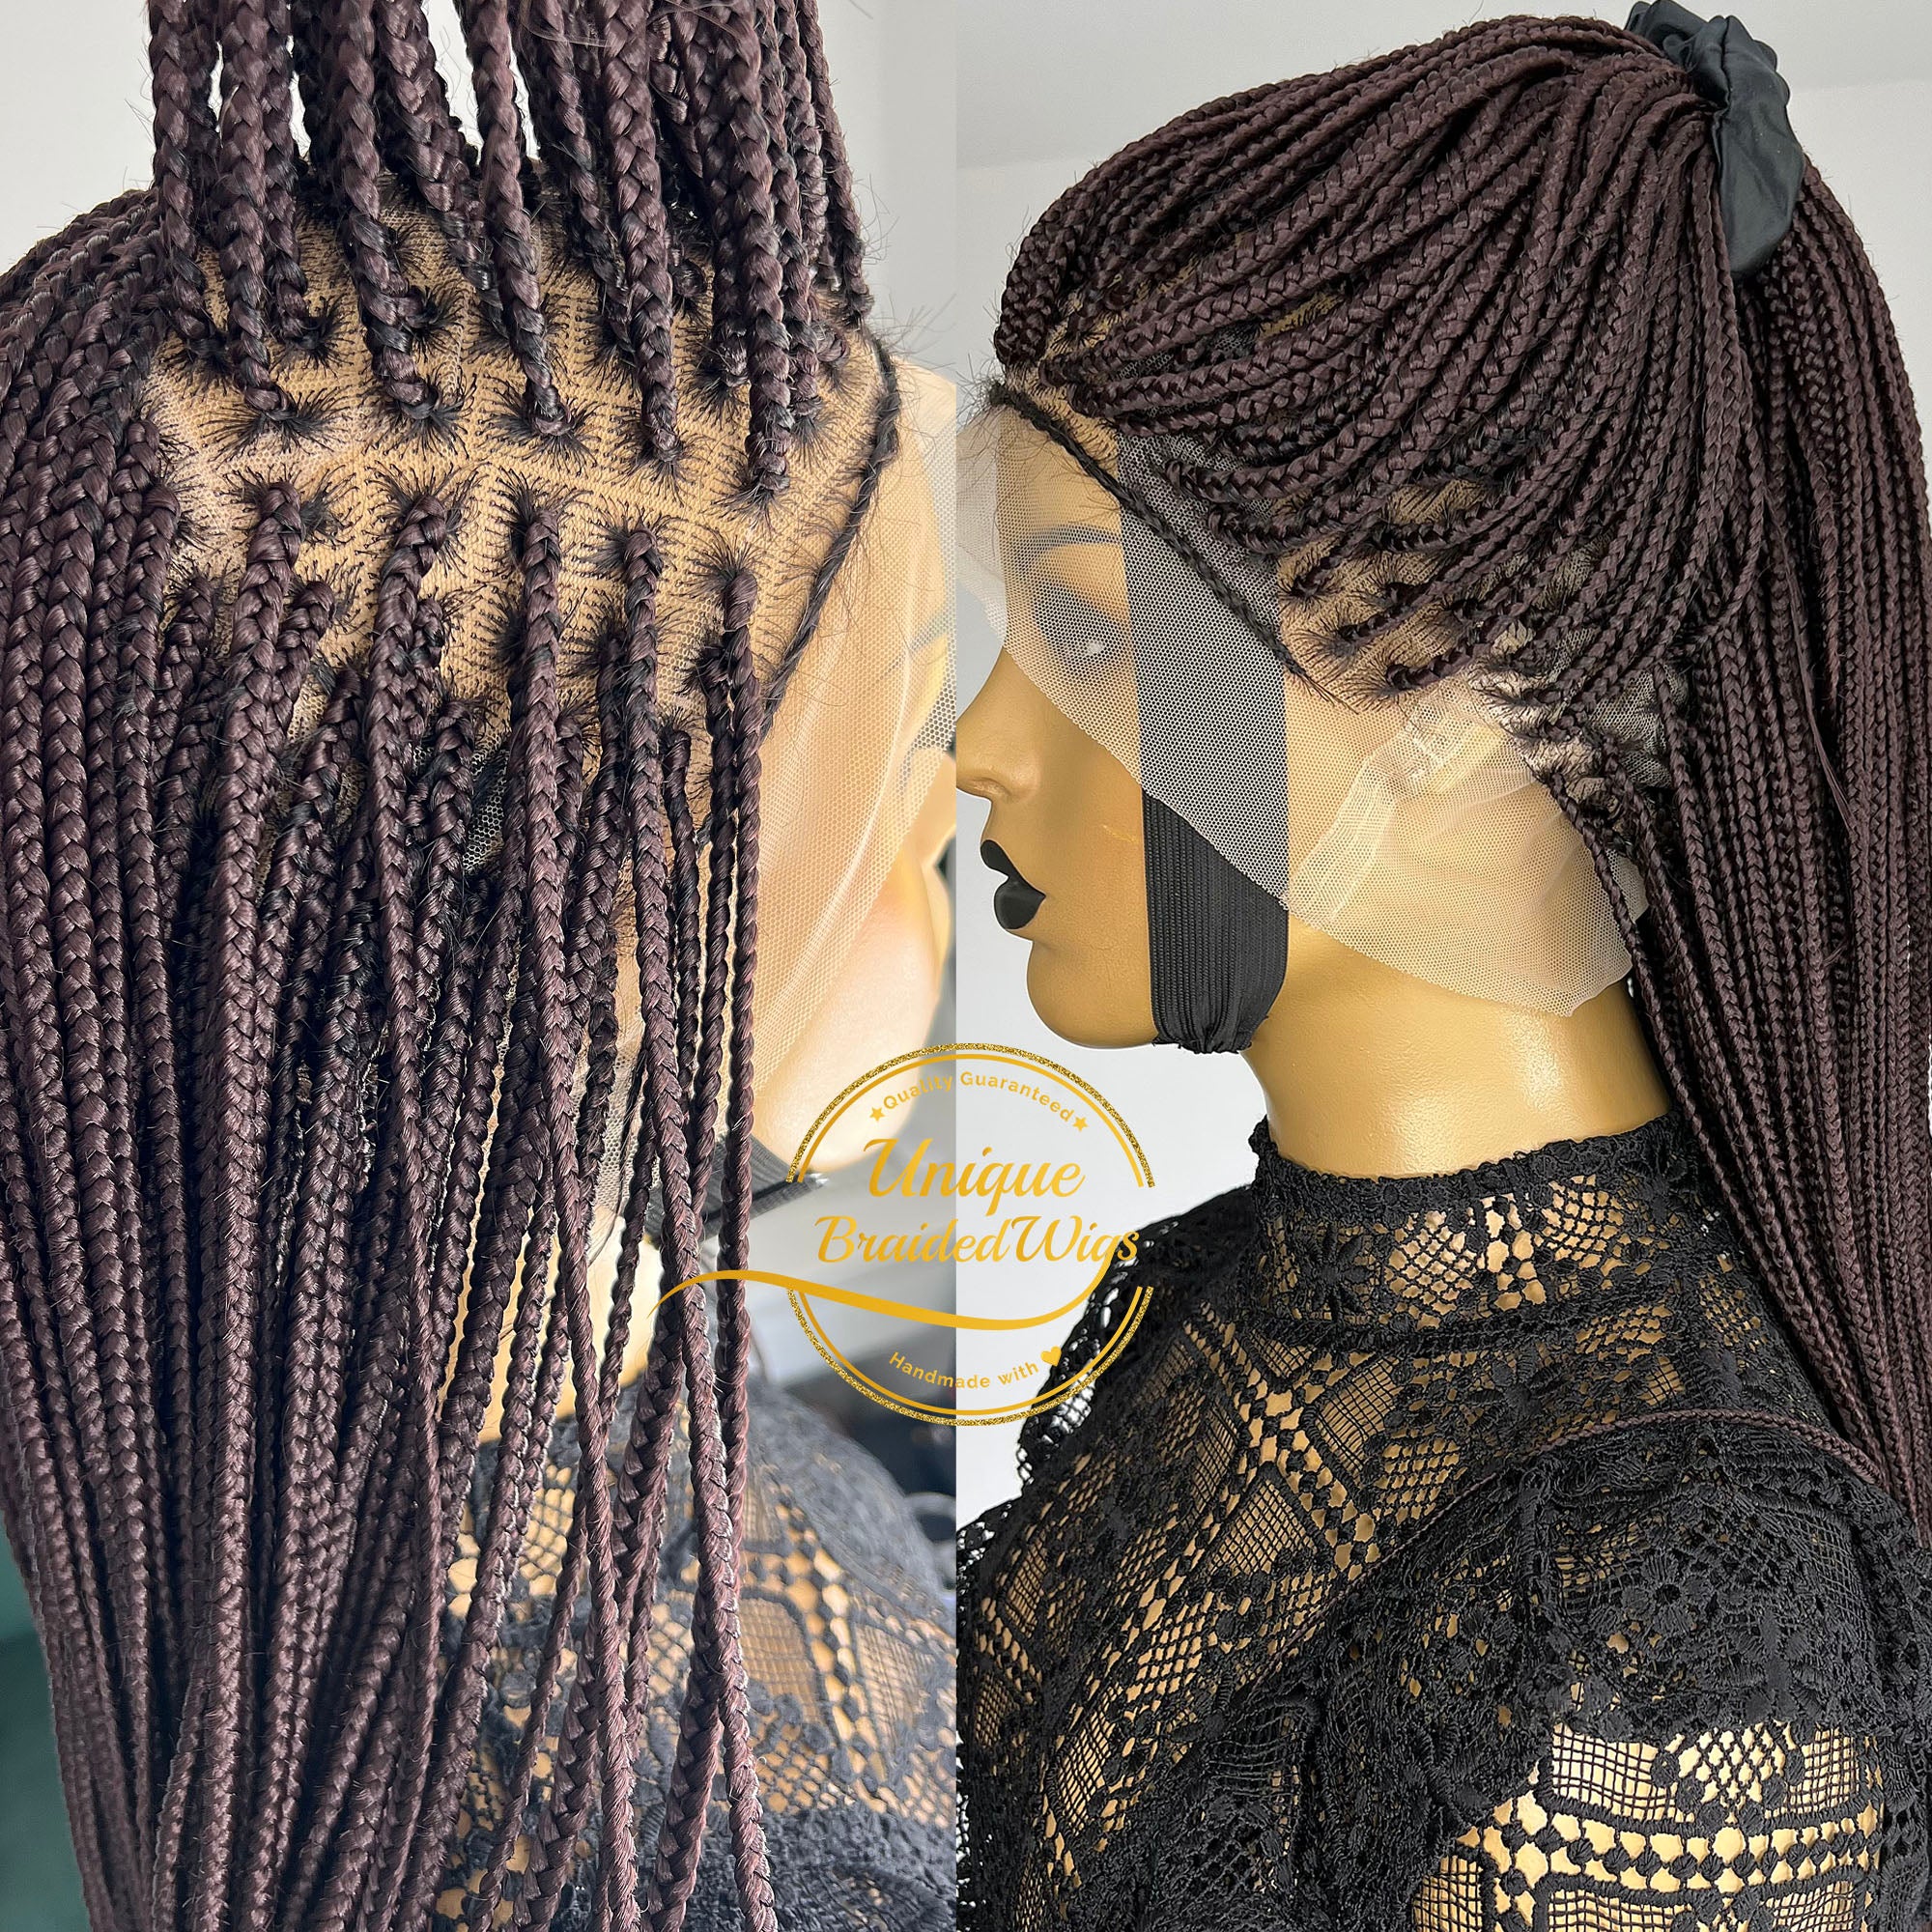 Small Cap Size Braided Wigs : Pink Knotless Braids - Express Wig